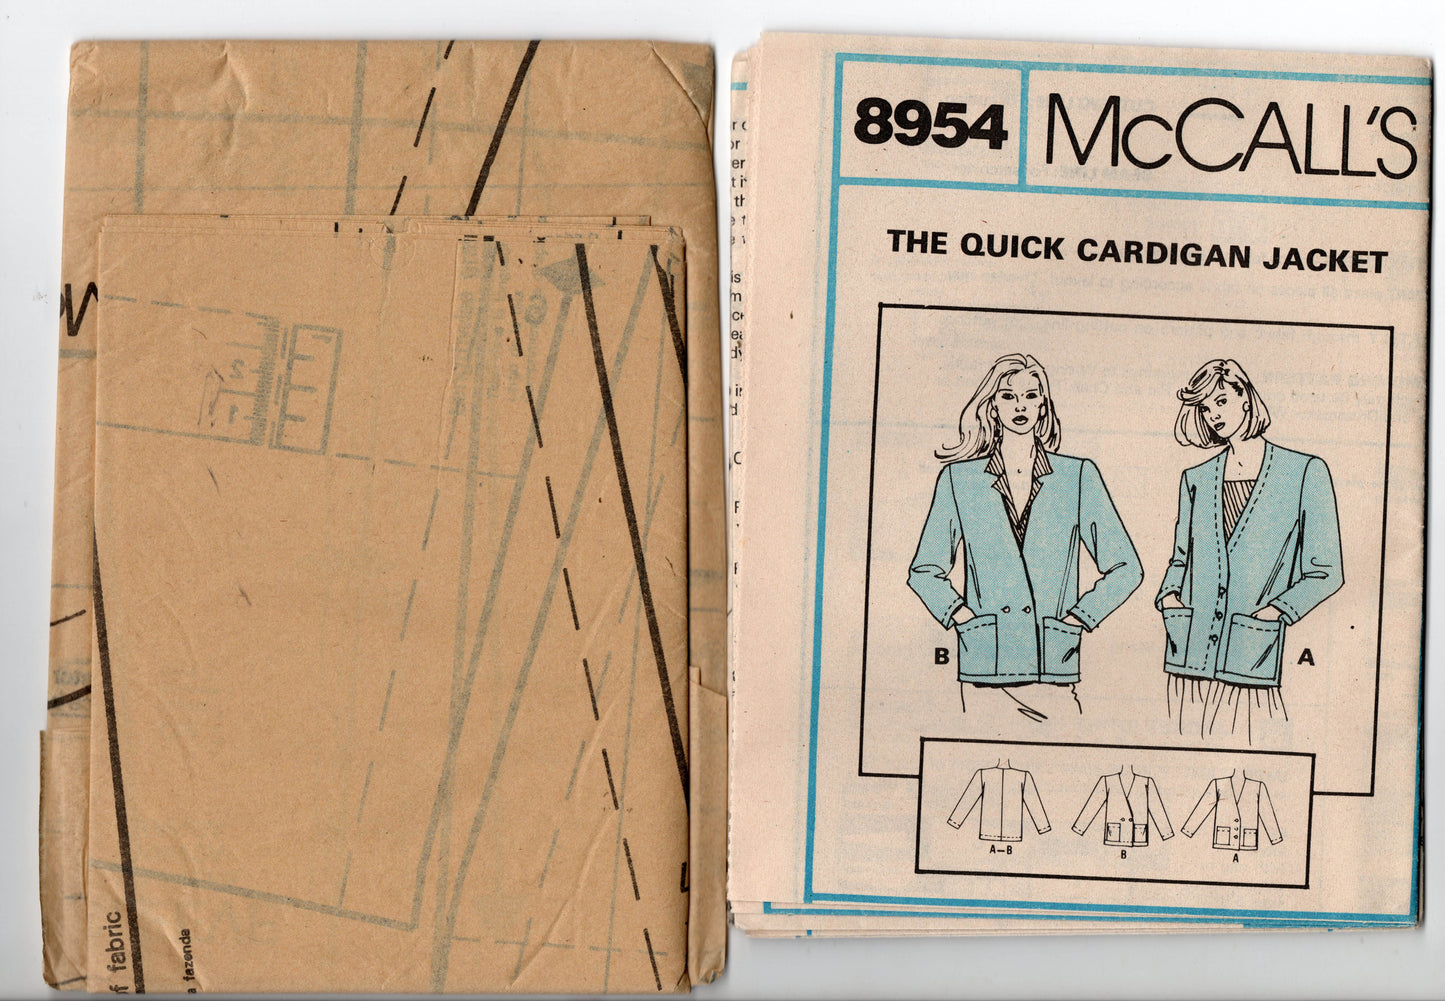 McCall's 8954 PALMER PLETSCH Womens Easy Fit Jacket 1980s Vintage Sewing Pattern Size 8 Bust 31 1/2 inches UNCUT Factory Folded